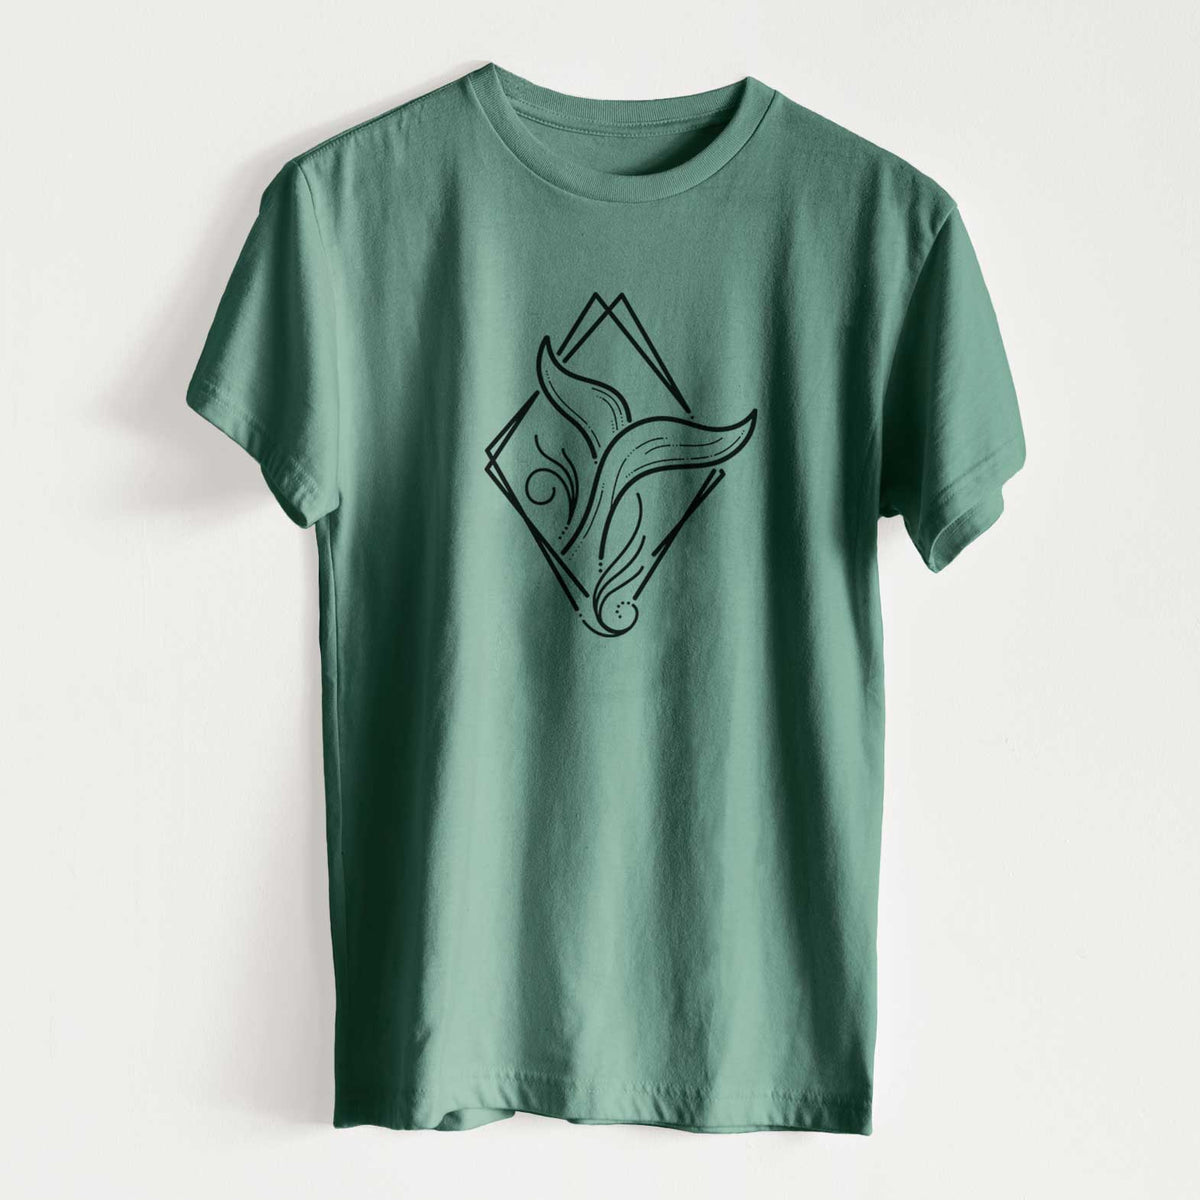 Whale Diamond - Unisex Recycled Eco Tee  - CLOSEOUT - FINAL SALE